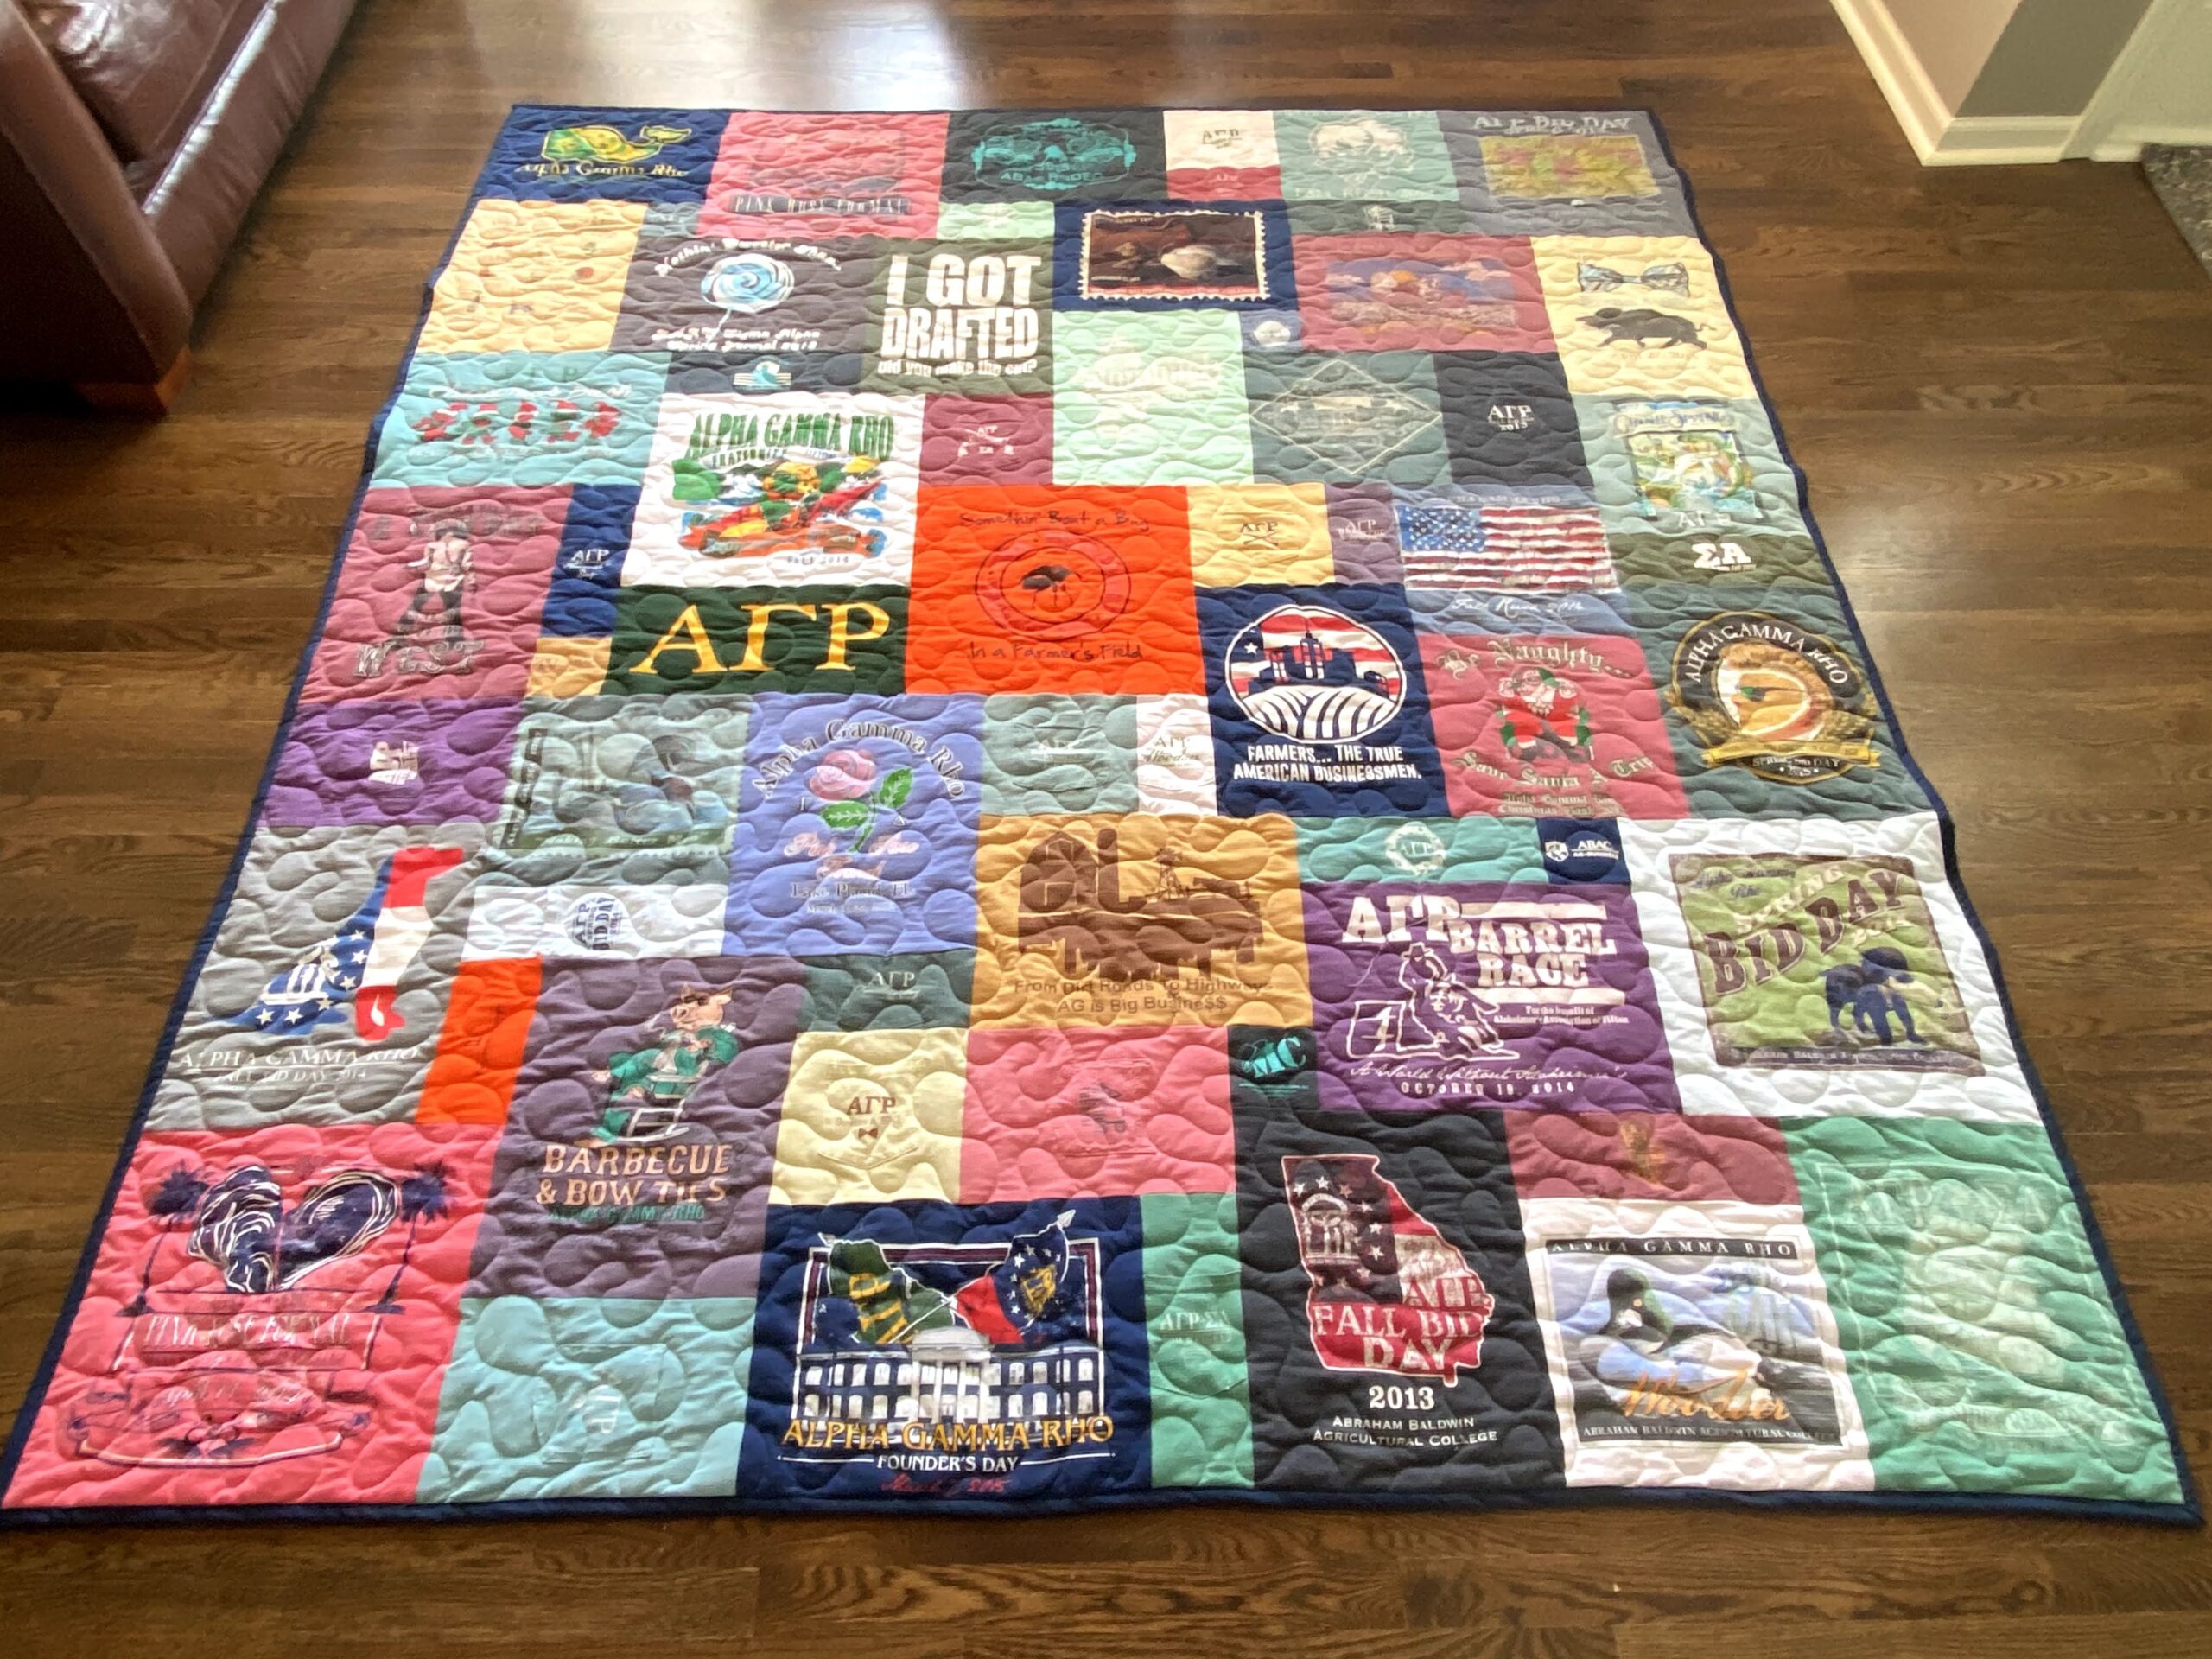 A quilt made of all the t-shirts that are on top of it.